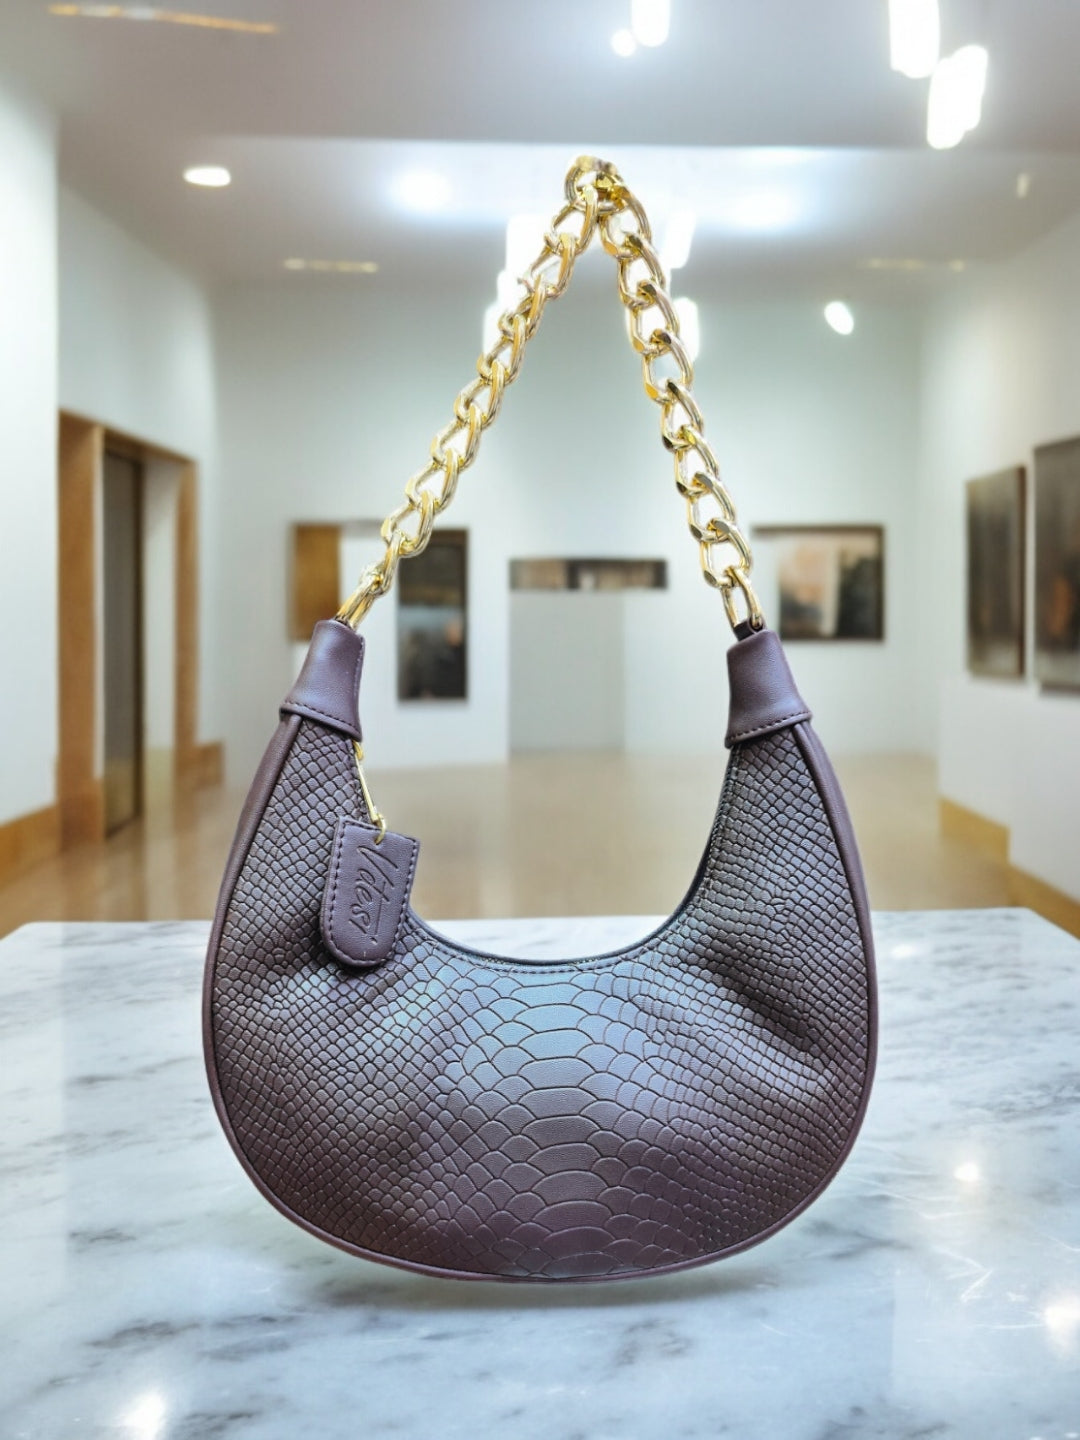 A Vdesi half moon bag perfect for every outfit you wear. 